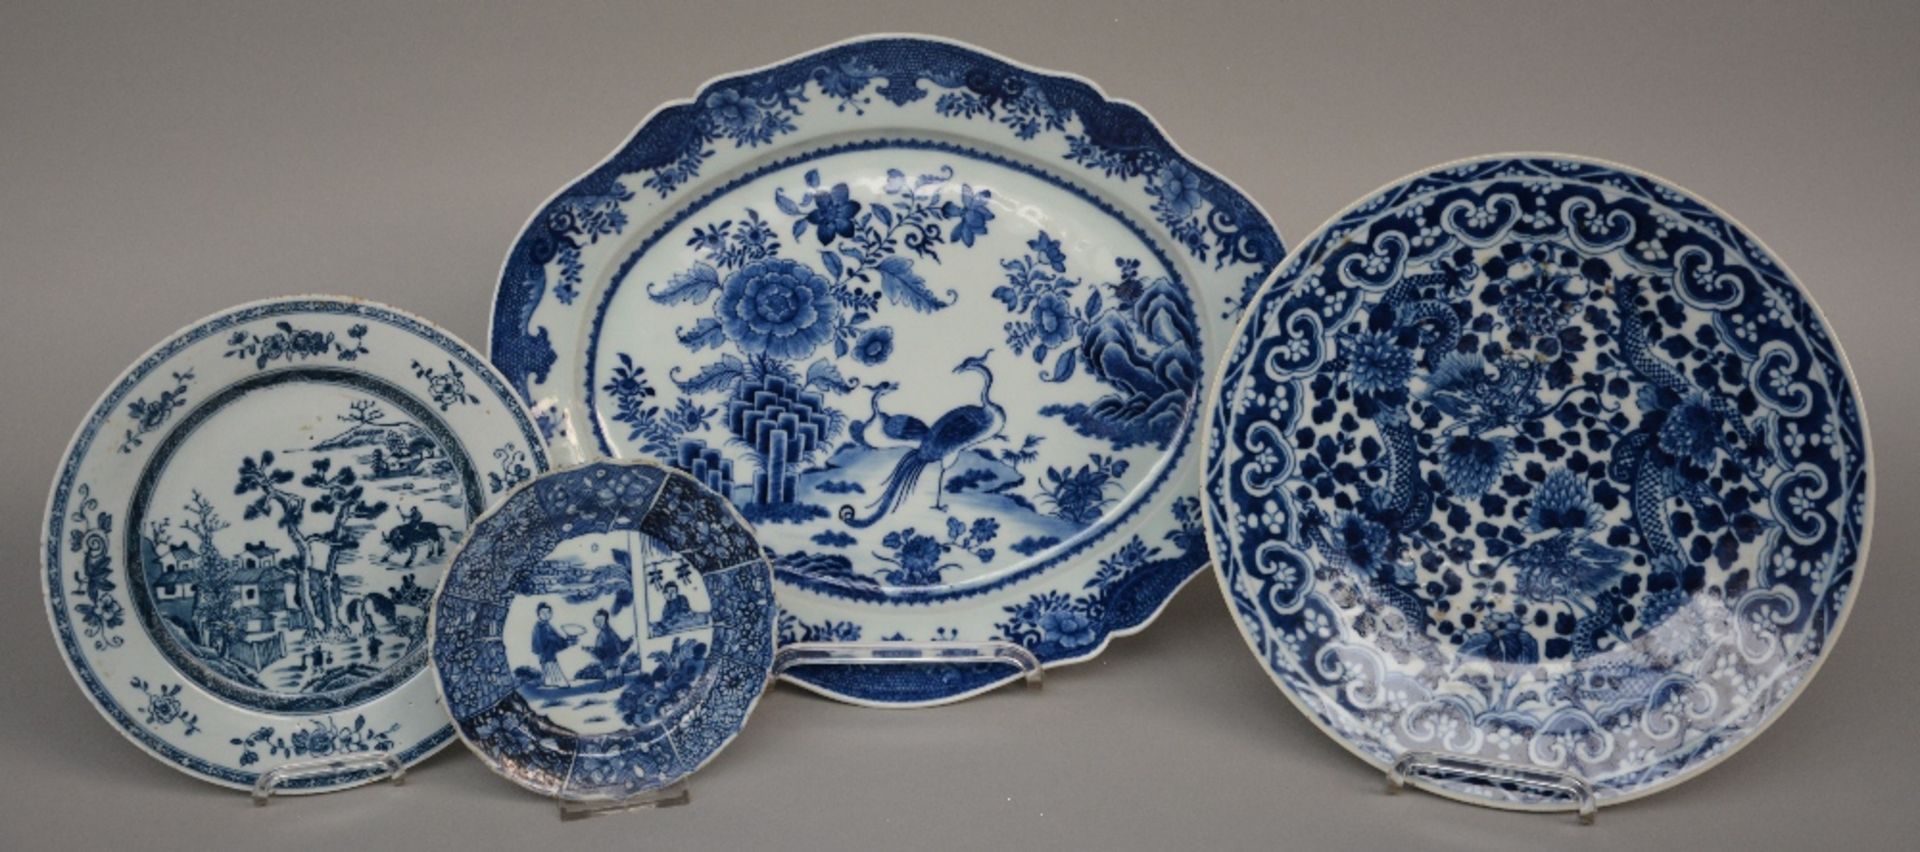 Four Chinese blue and white decorated plates depicting birds, flowers, dragons and figures, 18thC/